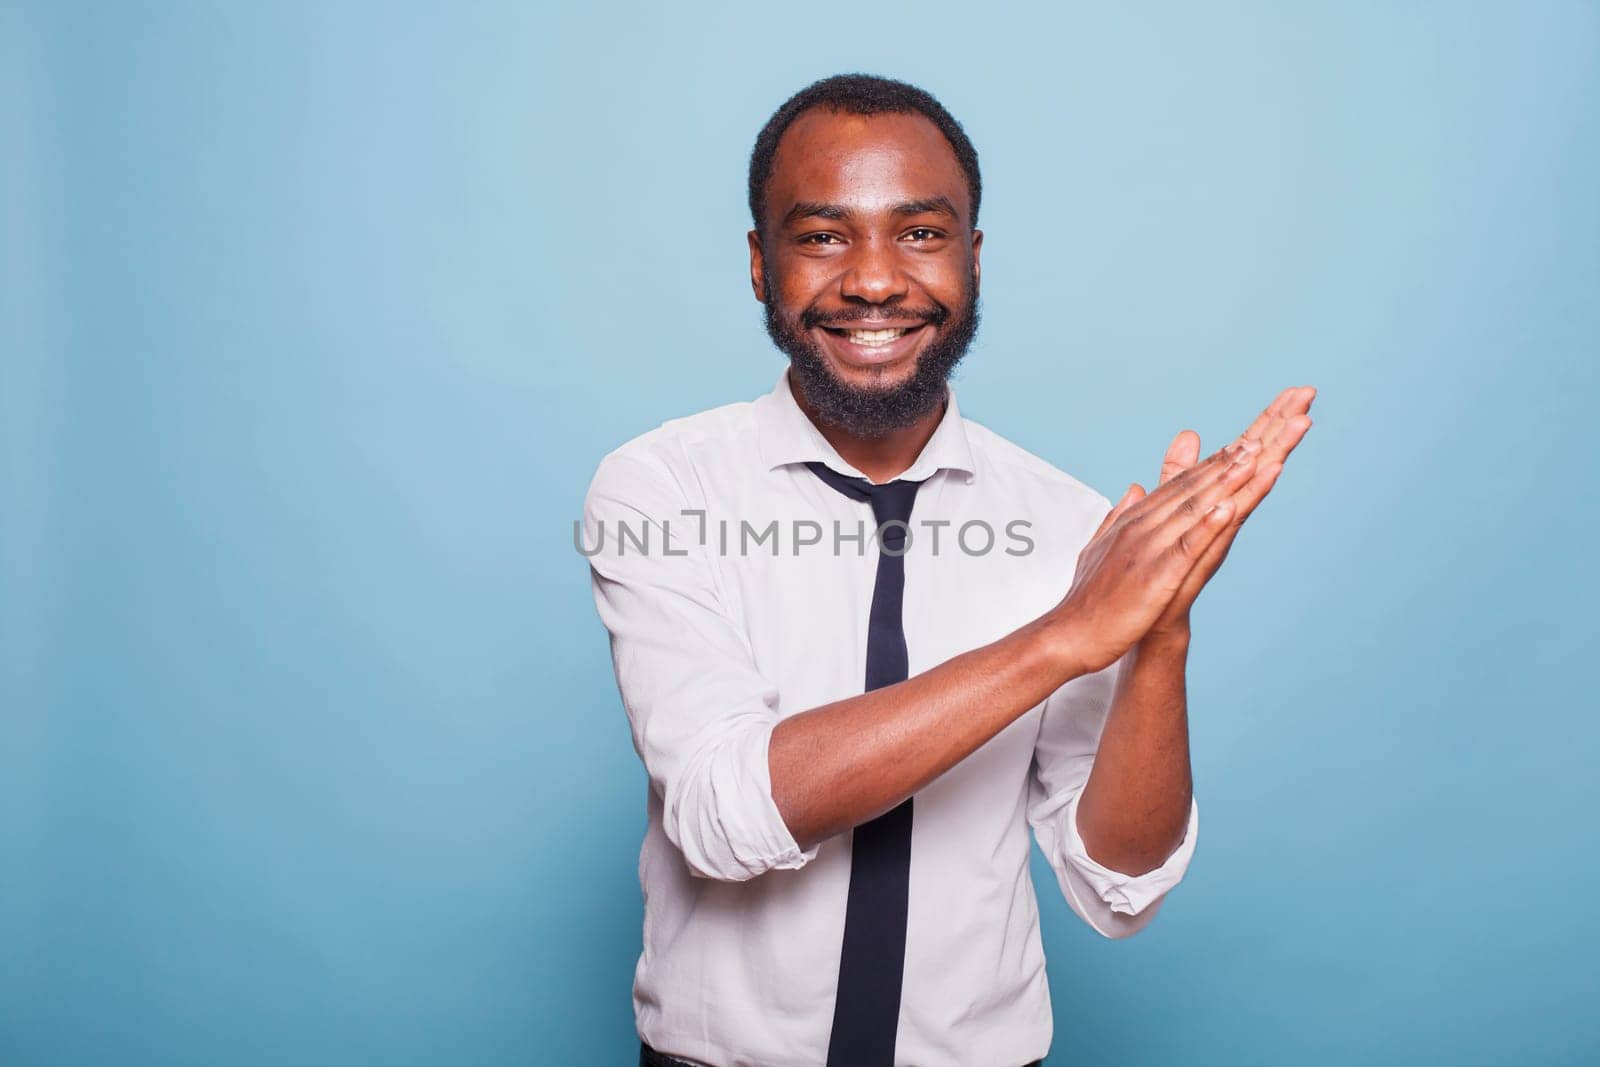 Smiling male adult clapping hands and cheering on job well done, enjoying a significant win. Excited black man expressing his congratulations with an applause gesture and positive response.